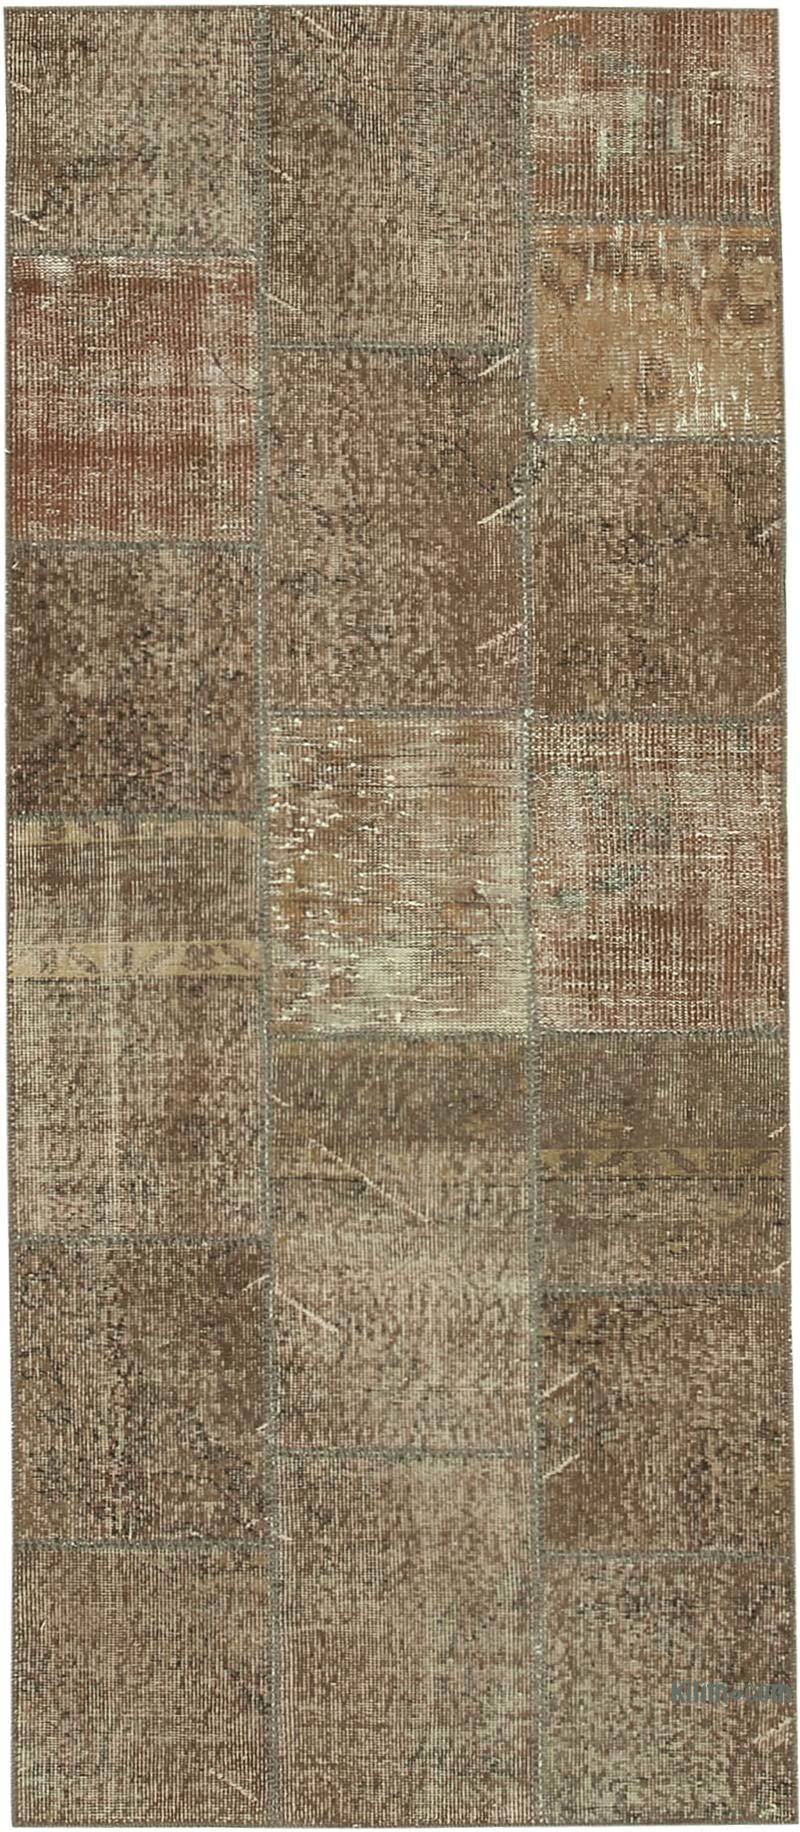 Brown Patchwork Hand-Knotted Turkish Runner - 3'  x 7' 1" (36 in. x 85 in.) - K0049635